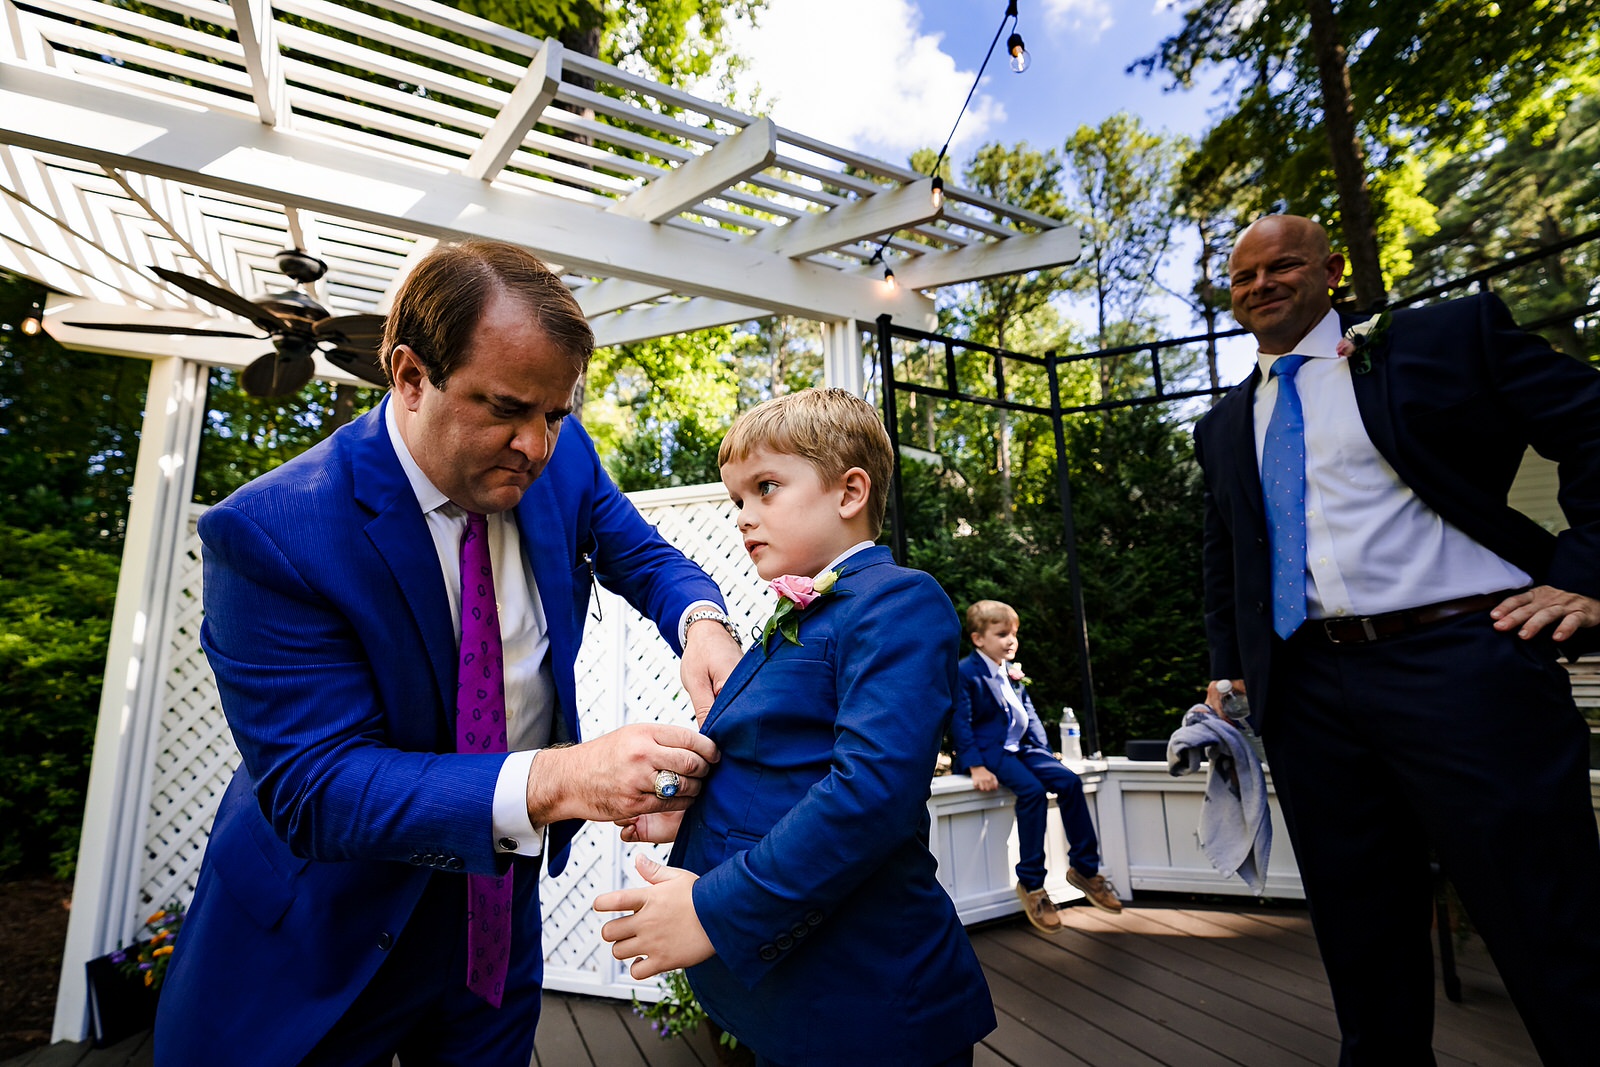 Friend of the groom helps the groom's son get buttoned into his suit coat